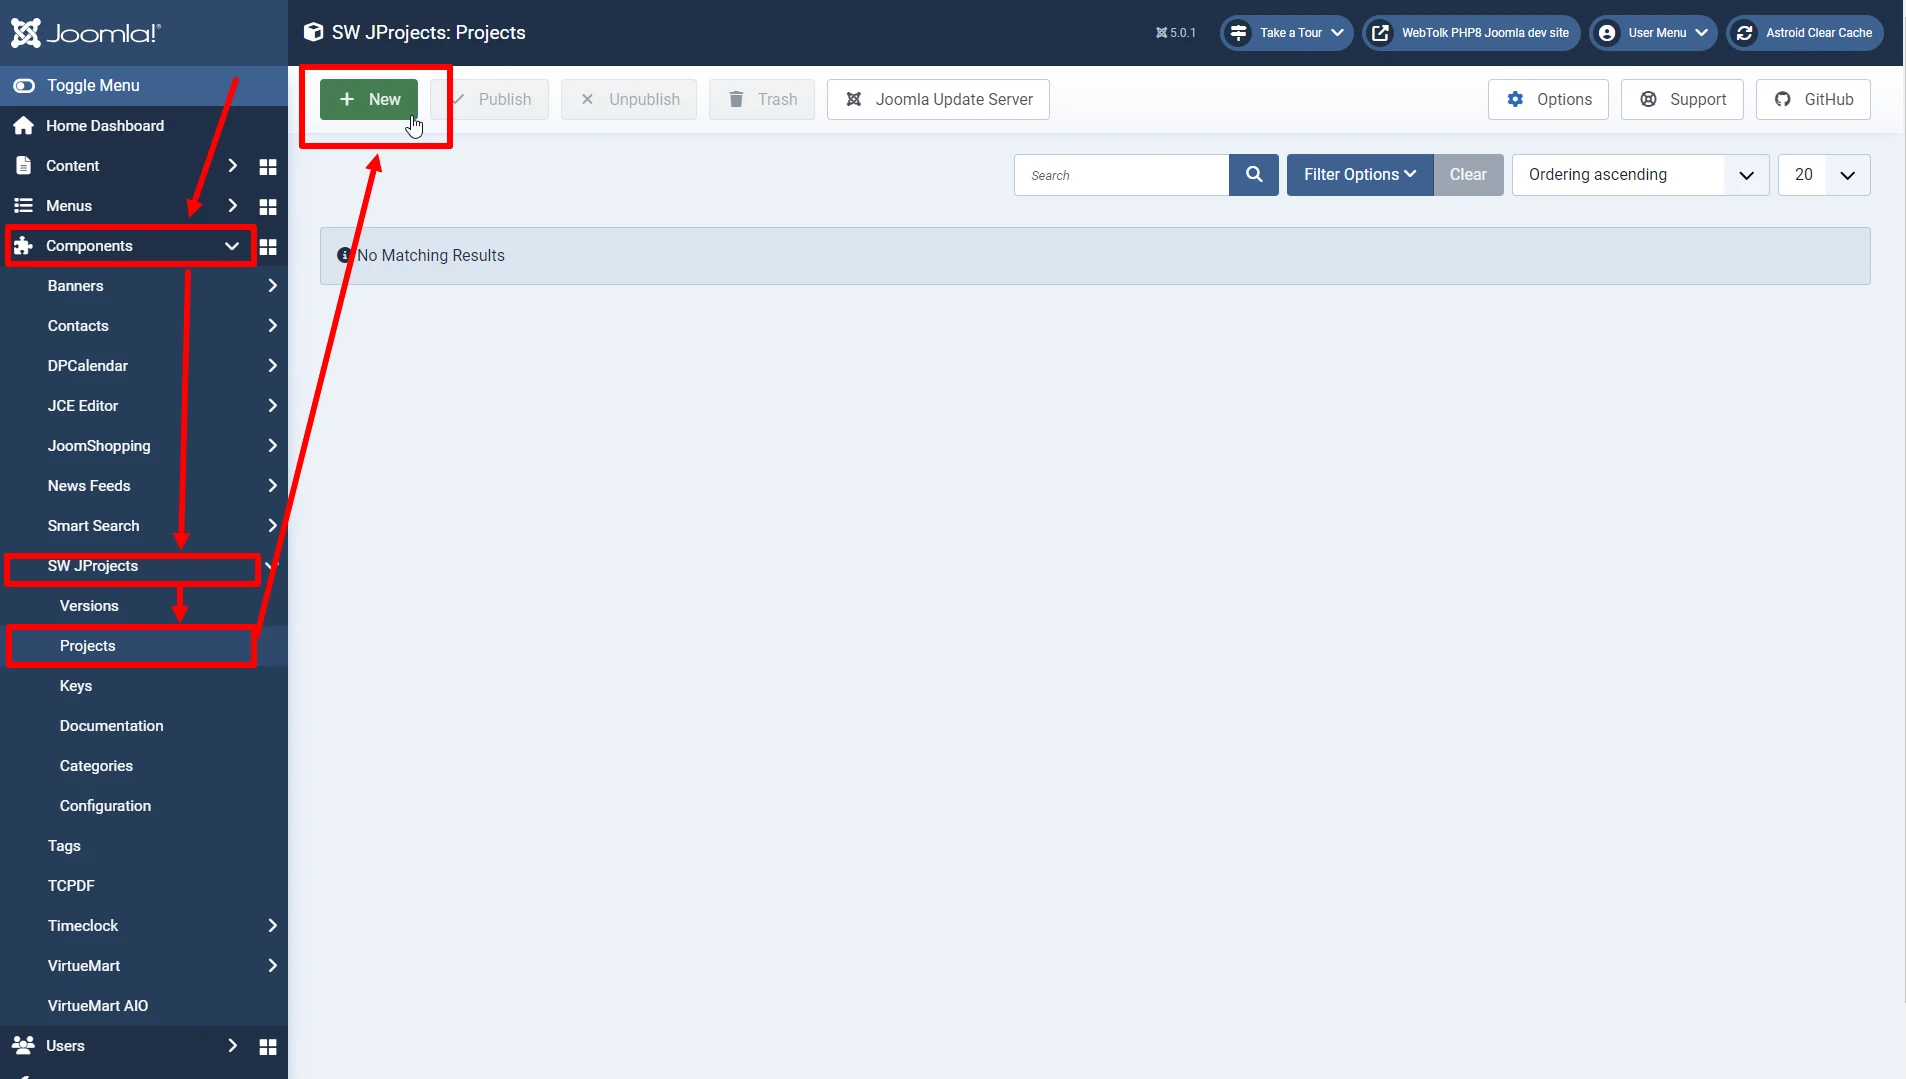 Creating a project for Joomla extensions in the SW JProjects component